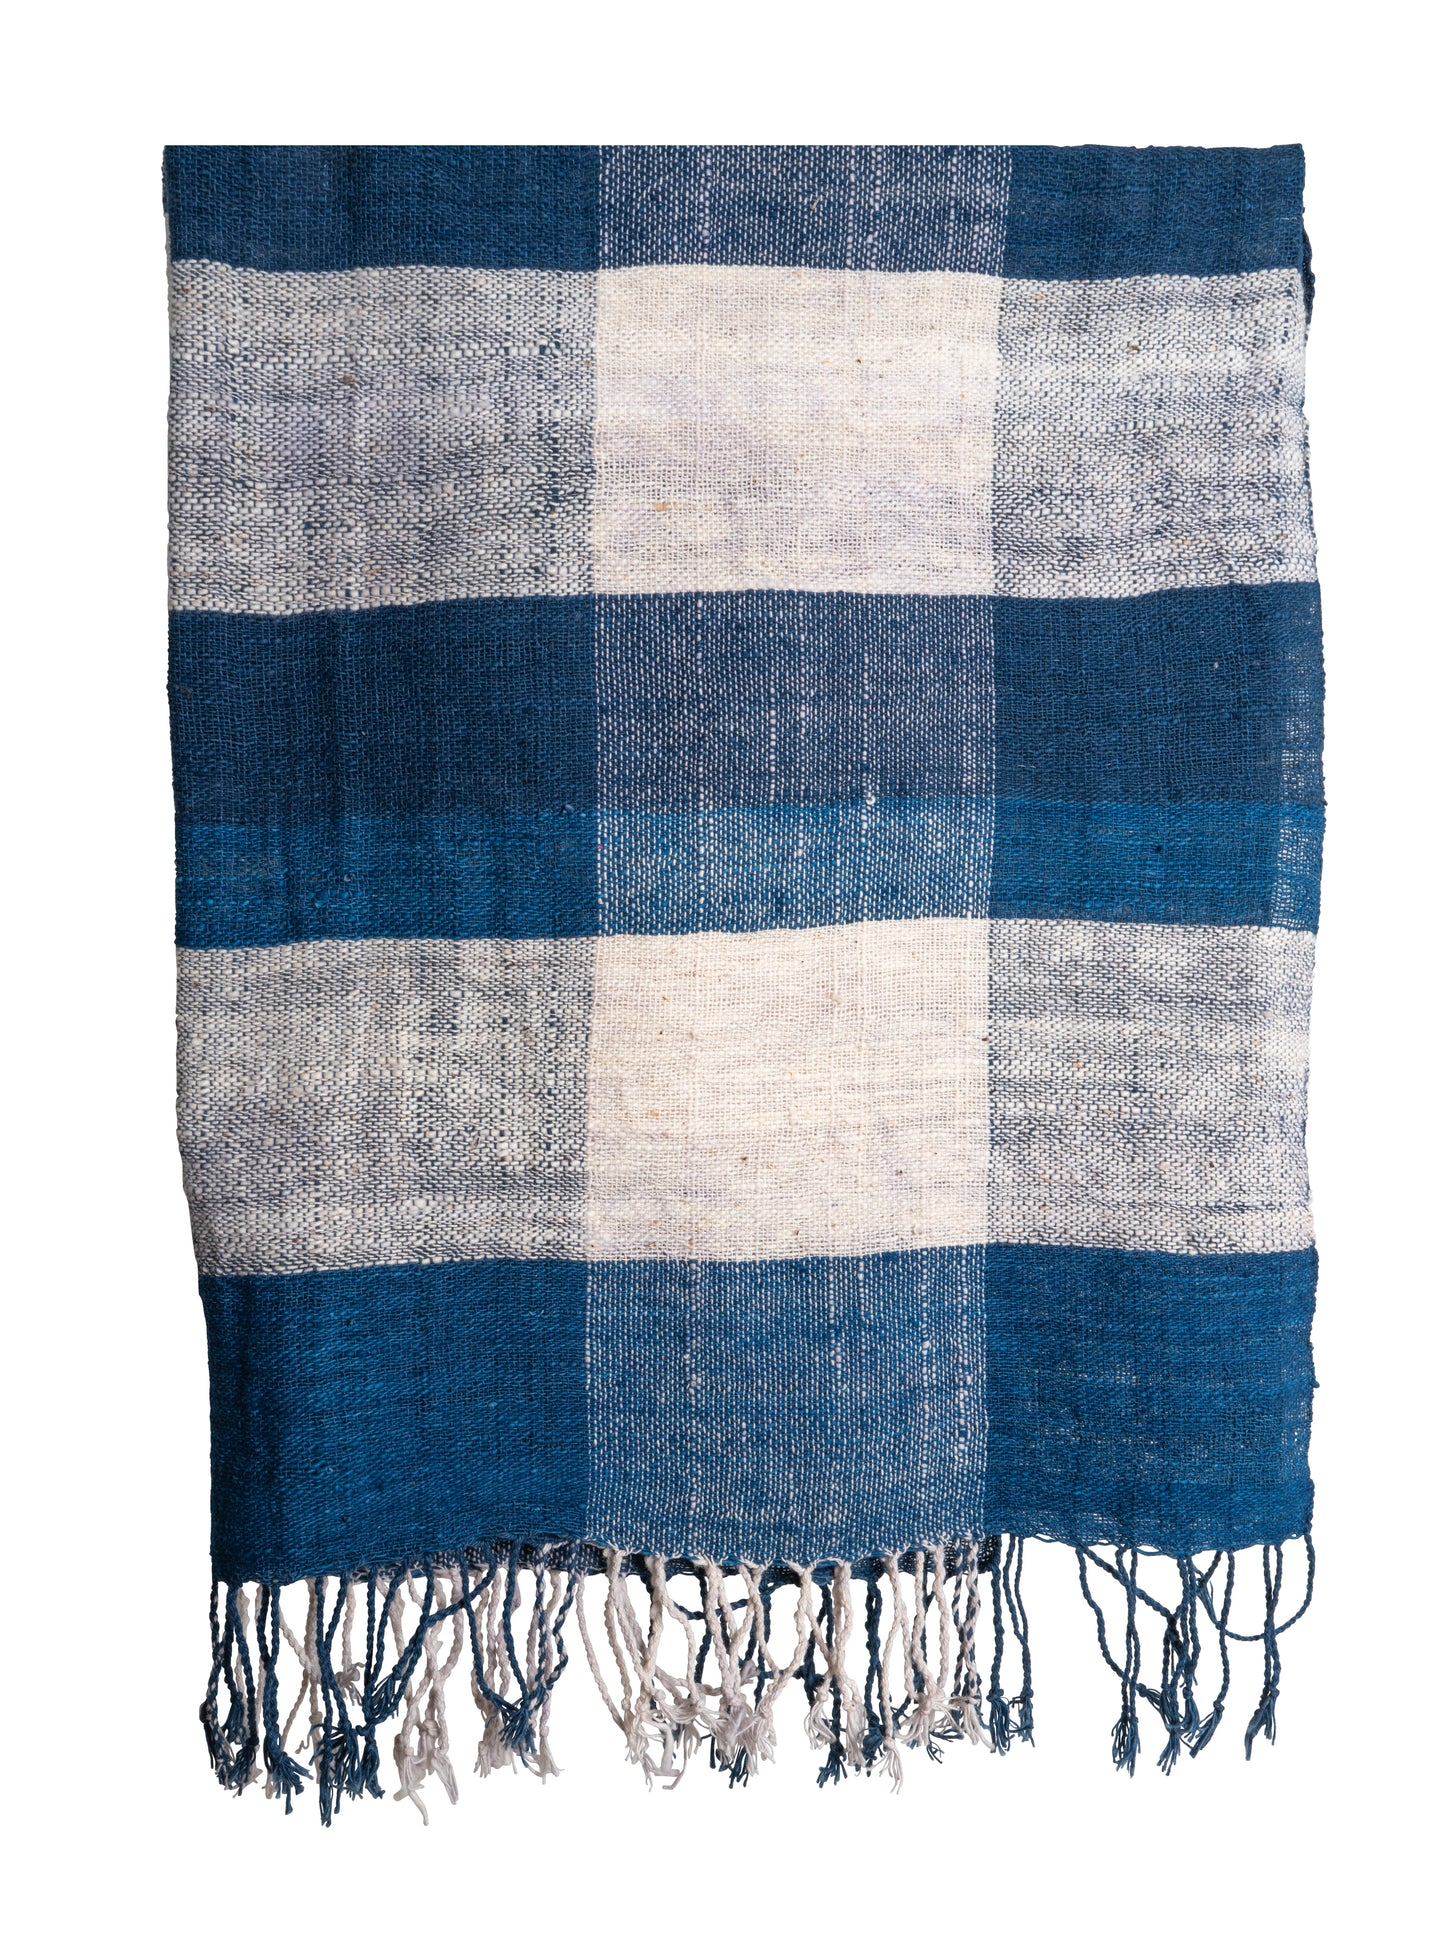 Natural Dyed Handspun Handwoven Cotton Scarf & Shawls - CCCollections